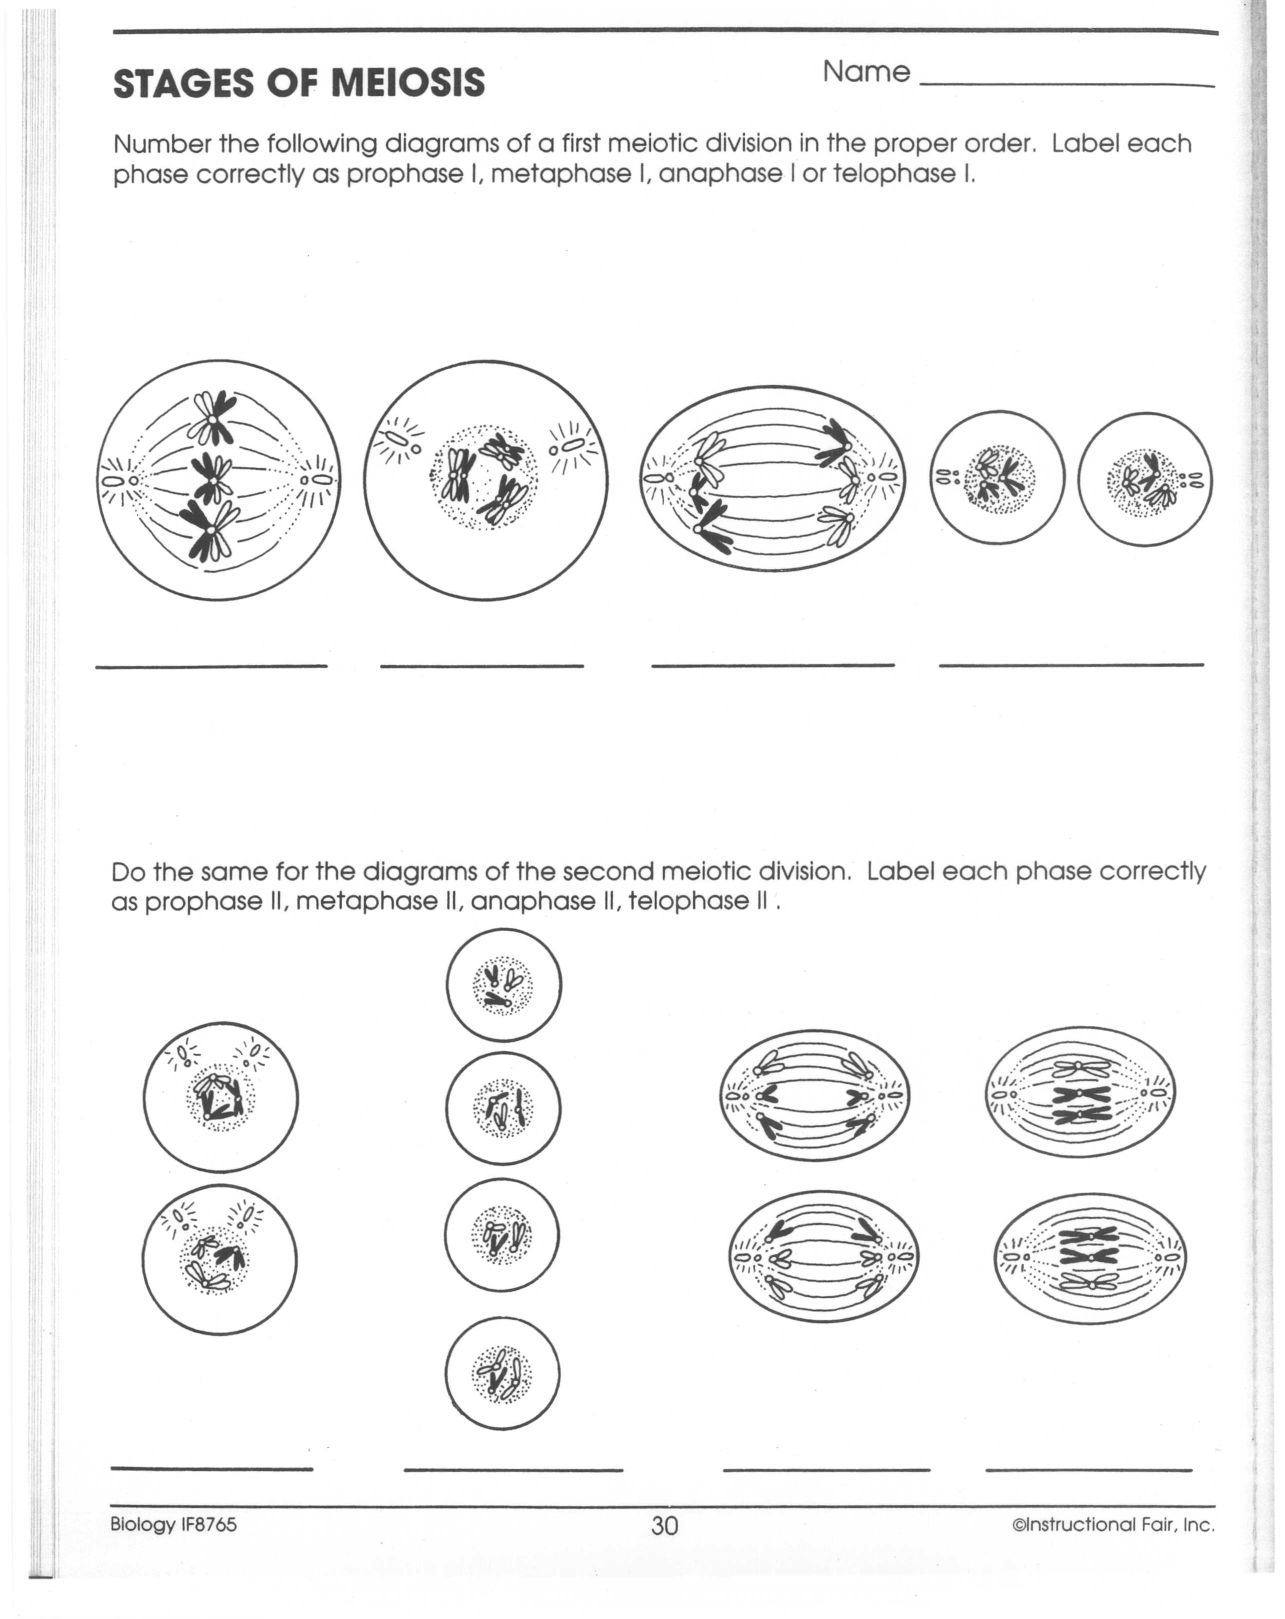 15 Best Images of Phases Of Meiosis Worksheet Meiosis Stages Worksheet, Meiosis Stages